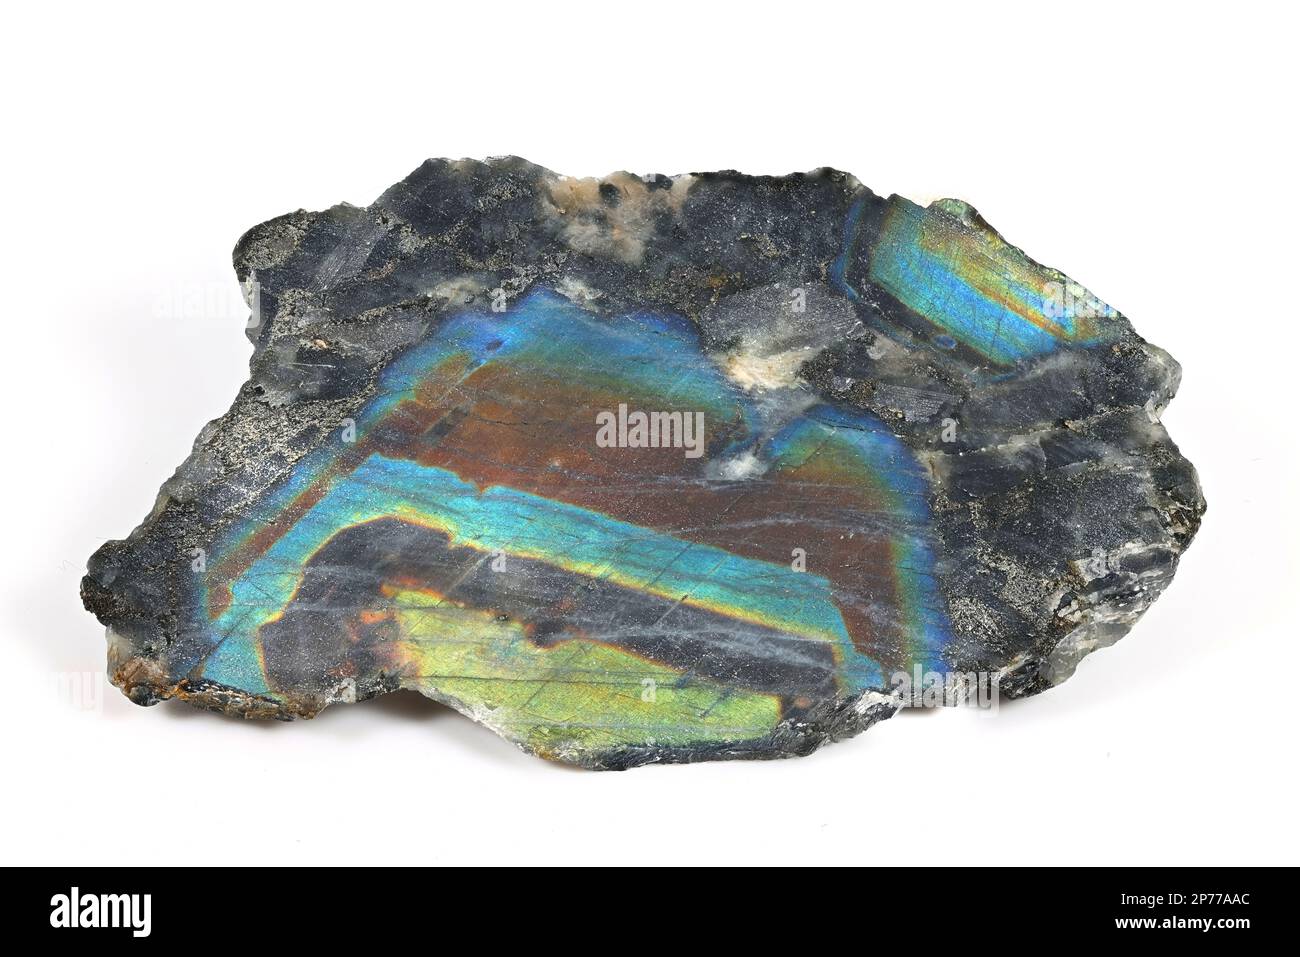 Uncut rough crystals of colorful mineral called spectrolite or labradorite, lapidary gemstone from Finland Stock Photo